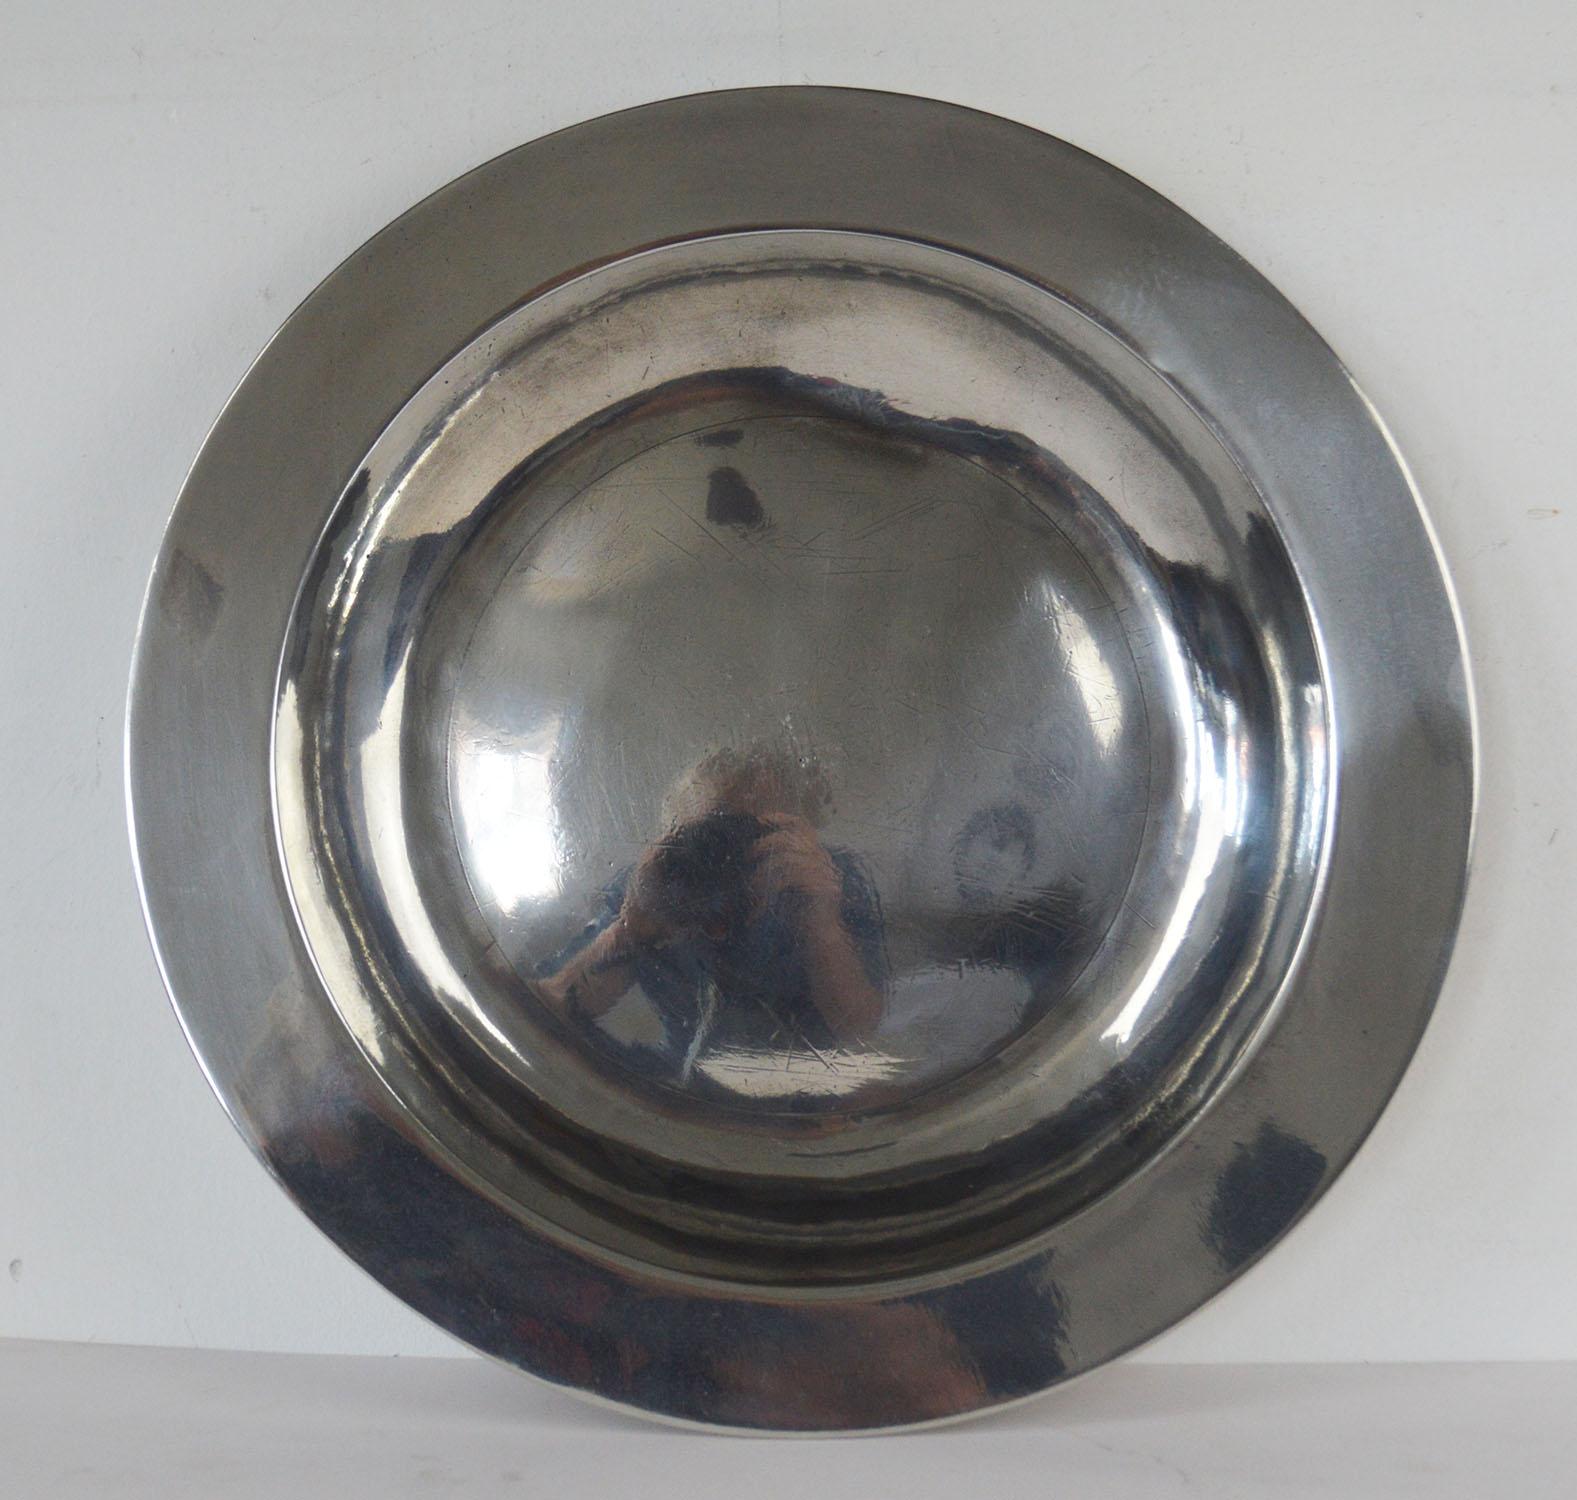 Wonderful highly polished dish. 

English, late 18th century

The pewter has been polished to its original shine to imitate polished silver. It was known as the Poor Man's Silver.

Rubbed touch marks on the underside. 

The great thing about